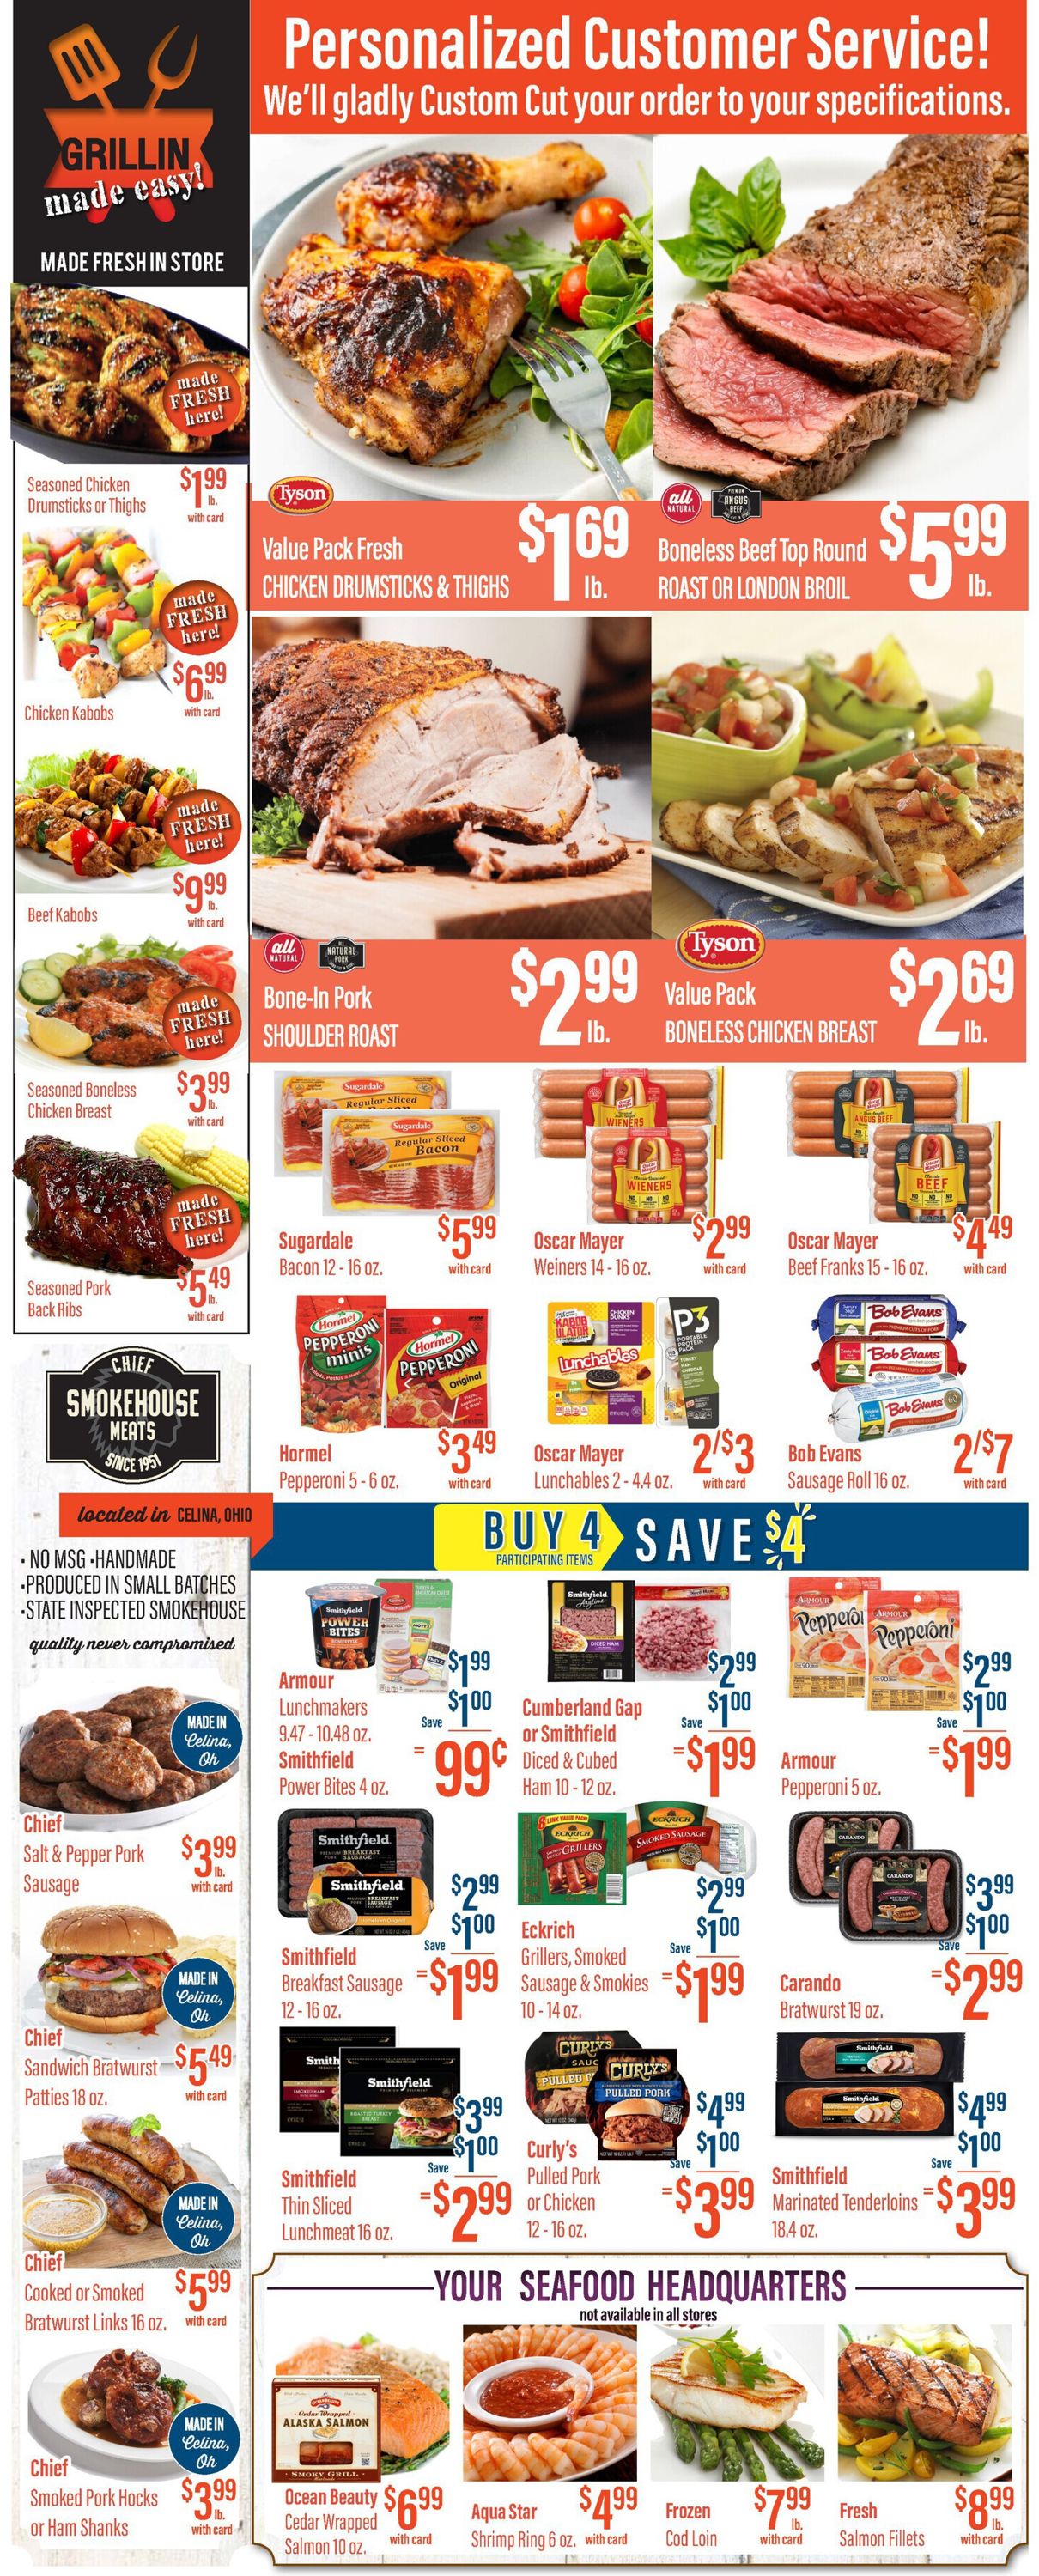 Remke Markets Ad from 07/22/2021